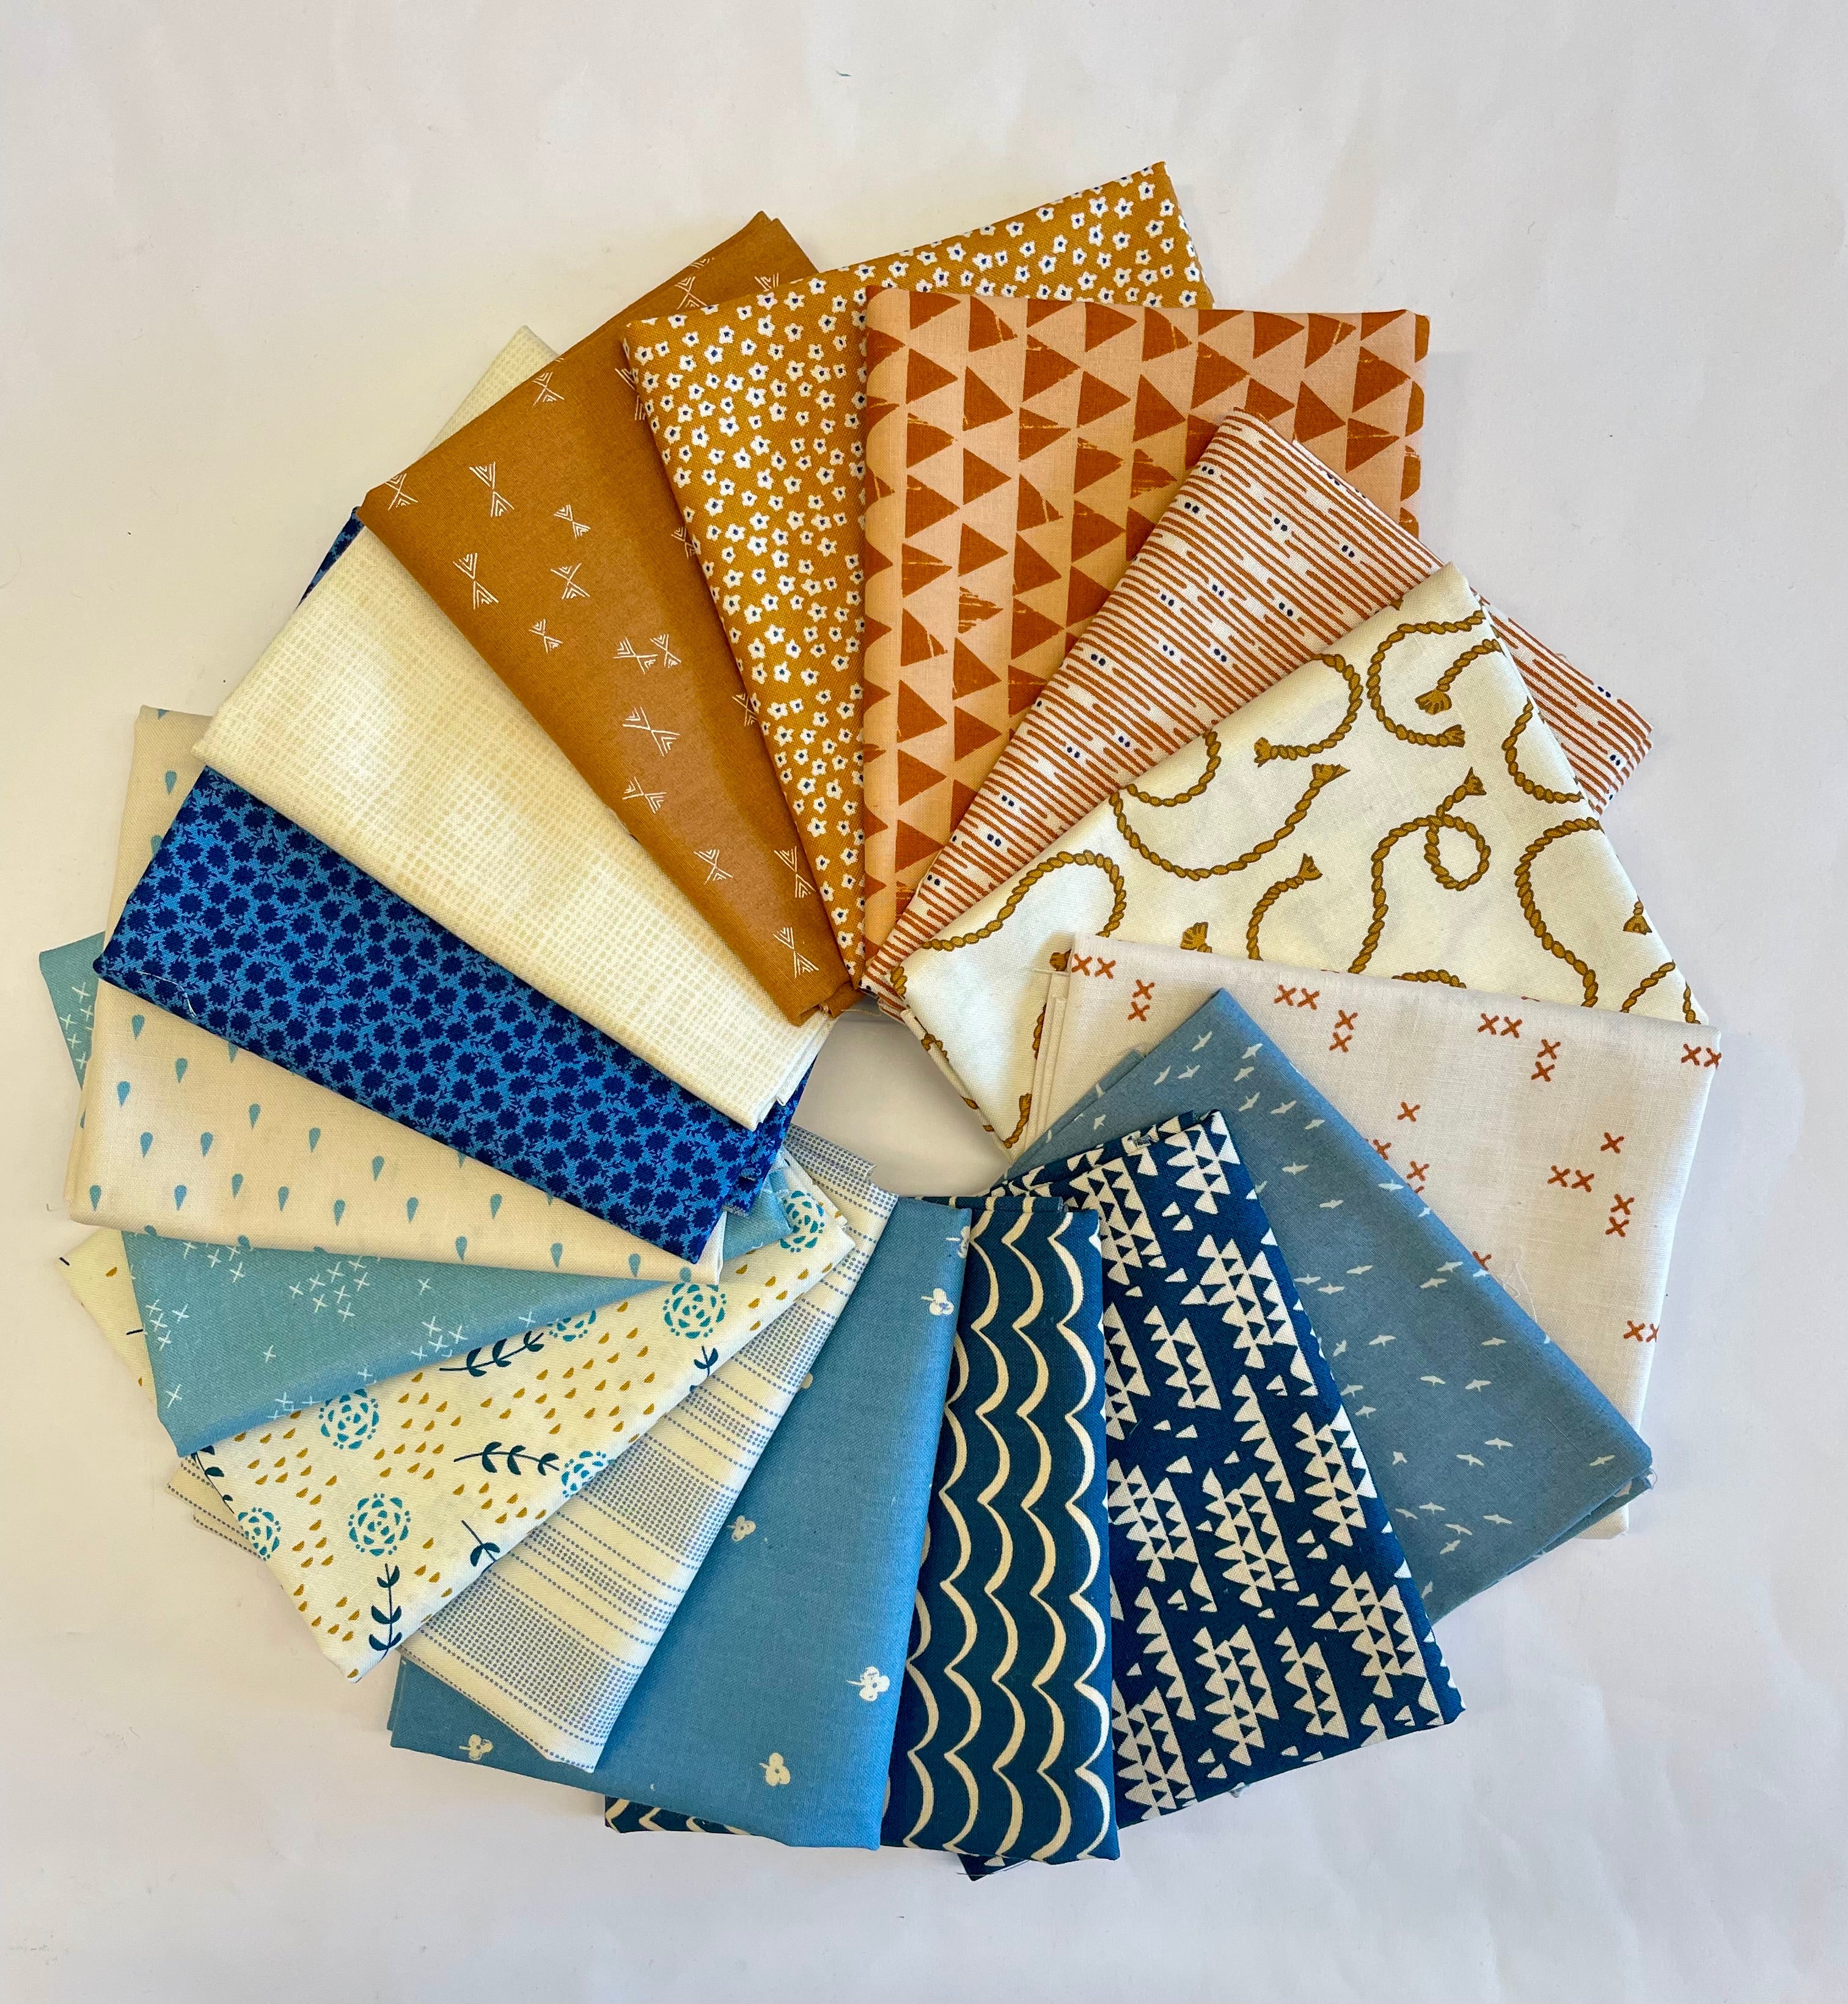 Fabric Kit For St Louis 16 Patch Quilt by Joz Makes Quilts